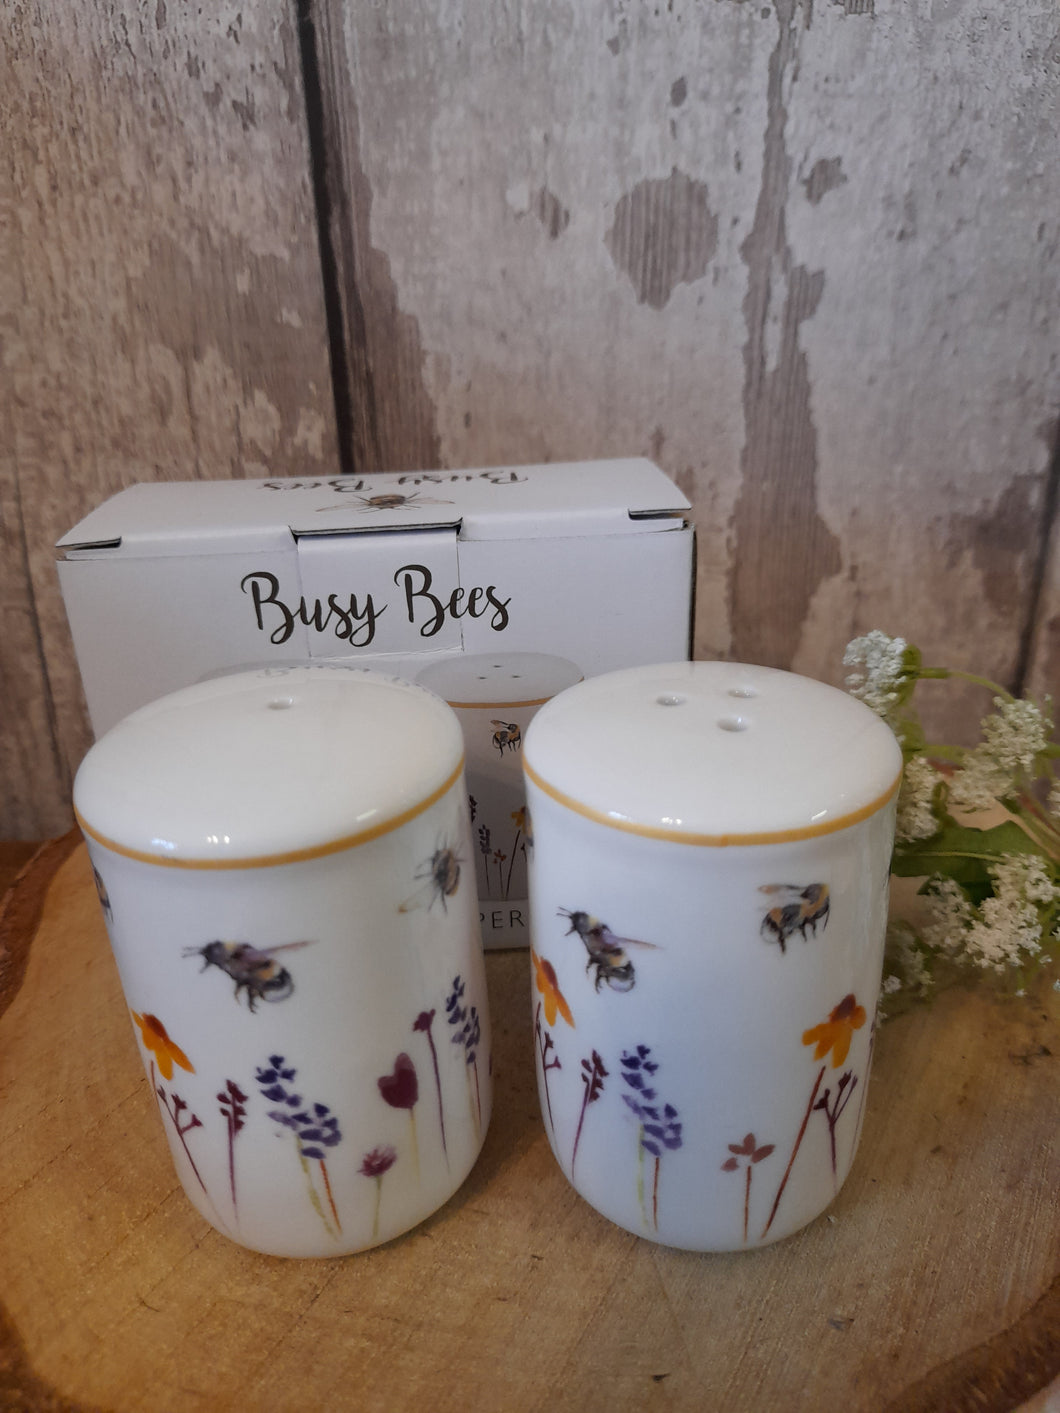 Busy Bees salt and pepper pots